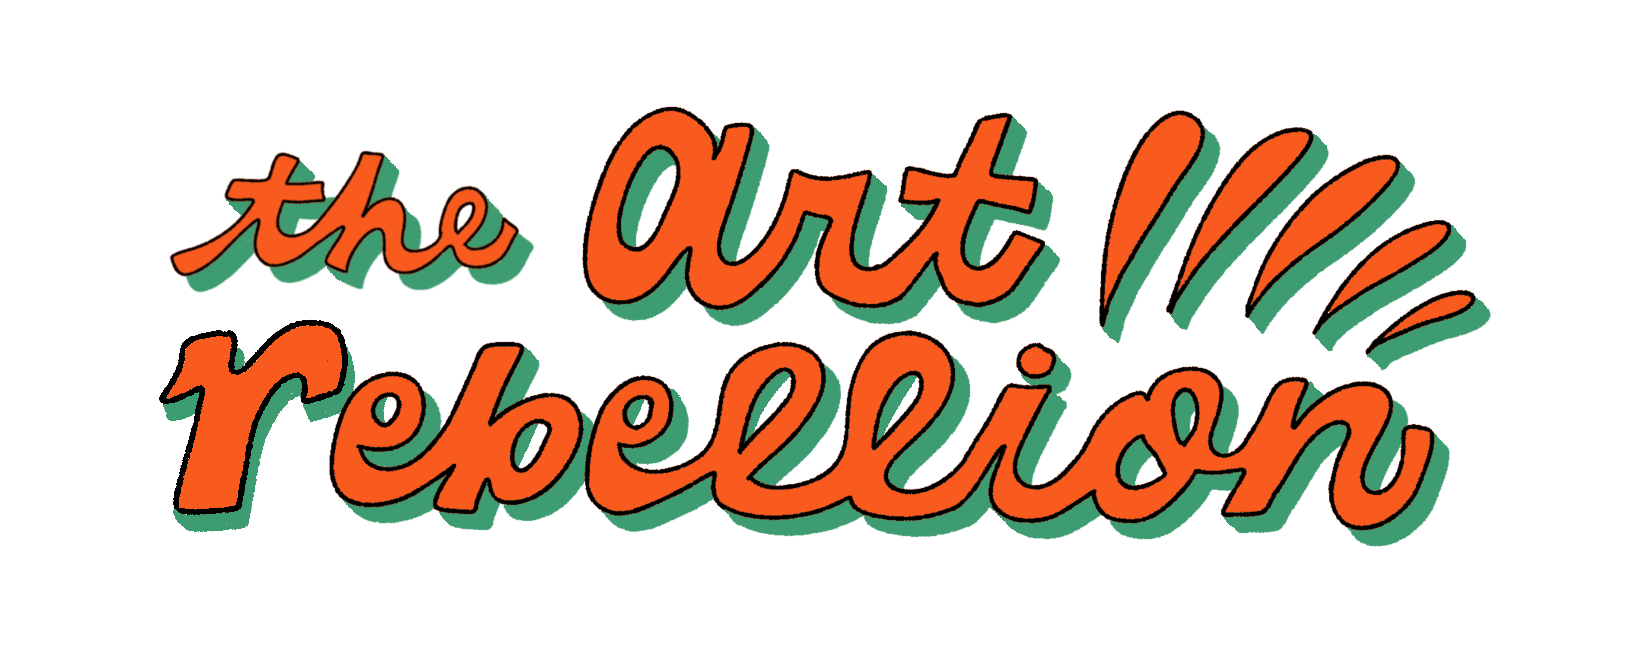 the-art-rebellion-logo---cursive-letters-spelling-the-art-rebellion-in-red-with-a-green-highlight